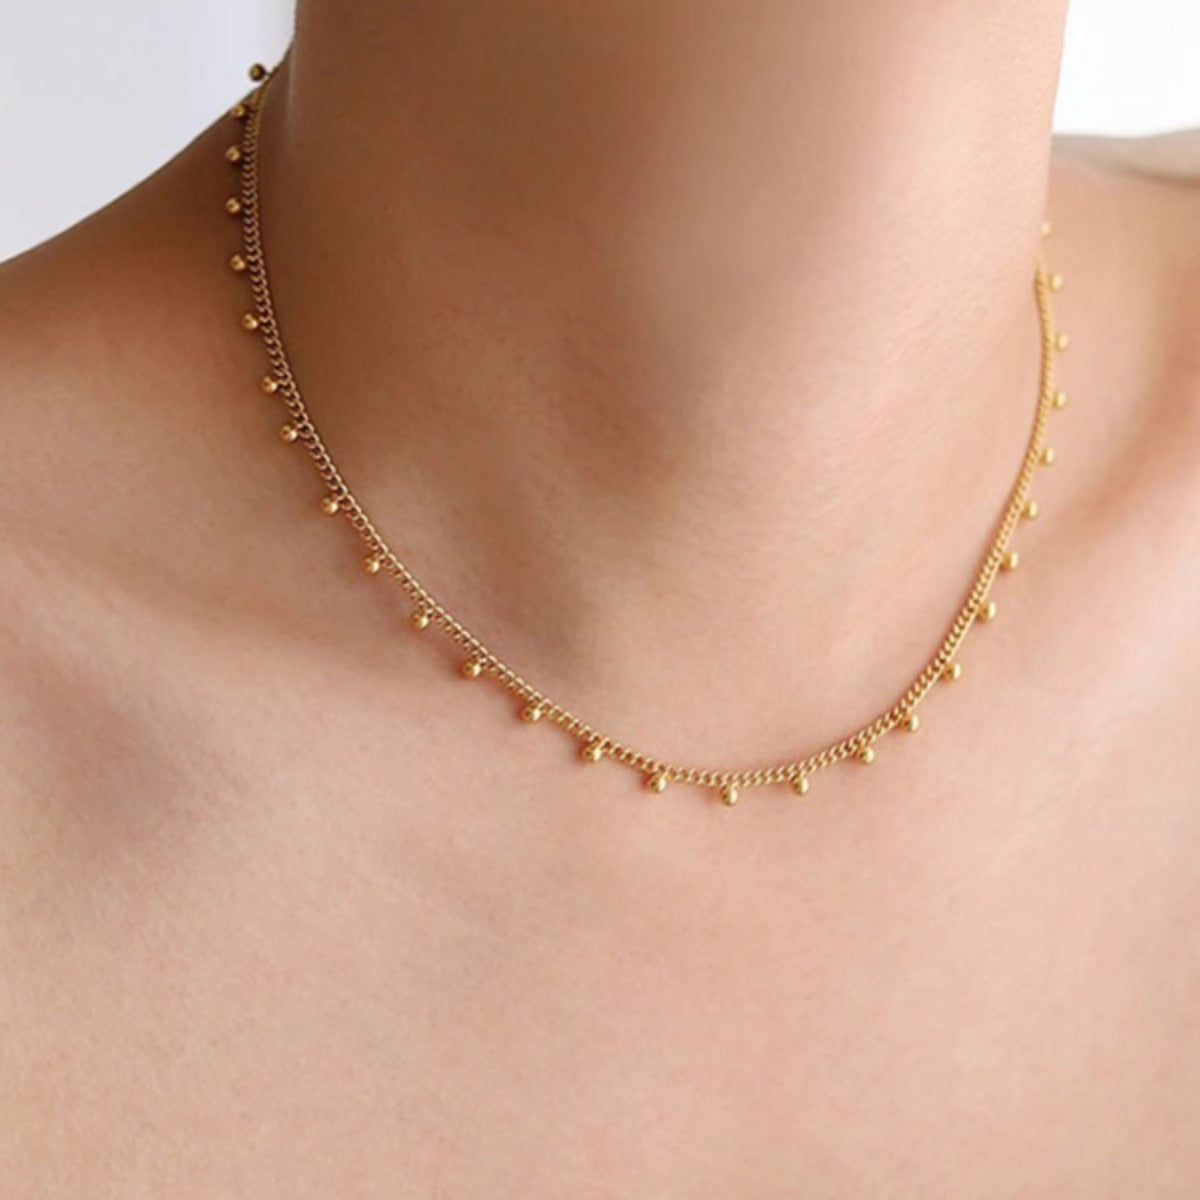 Lace Gold Ball Beads Cable Chain Titanium Stainless Steel Choker Necklace AL766